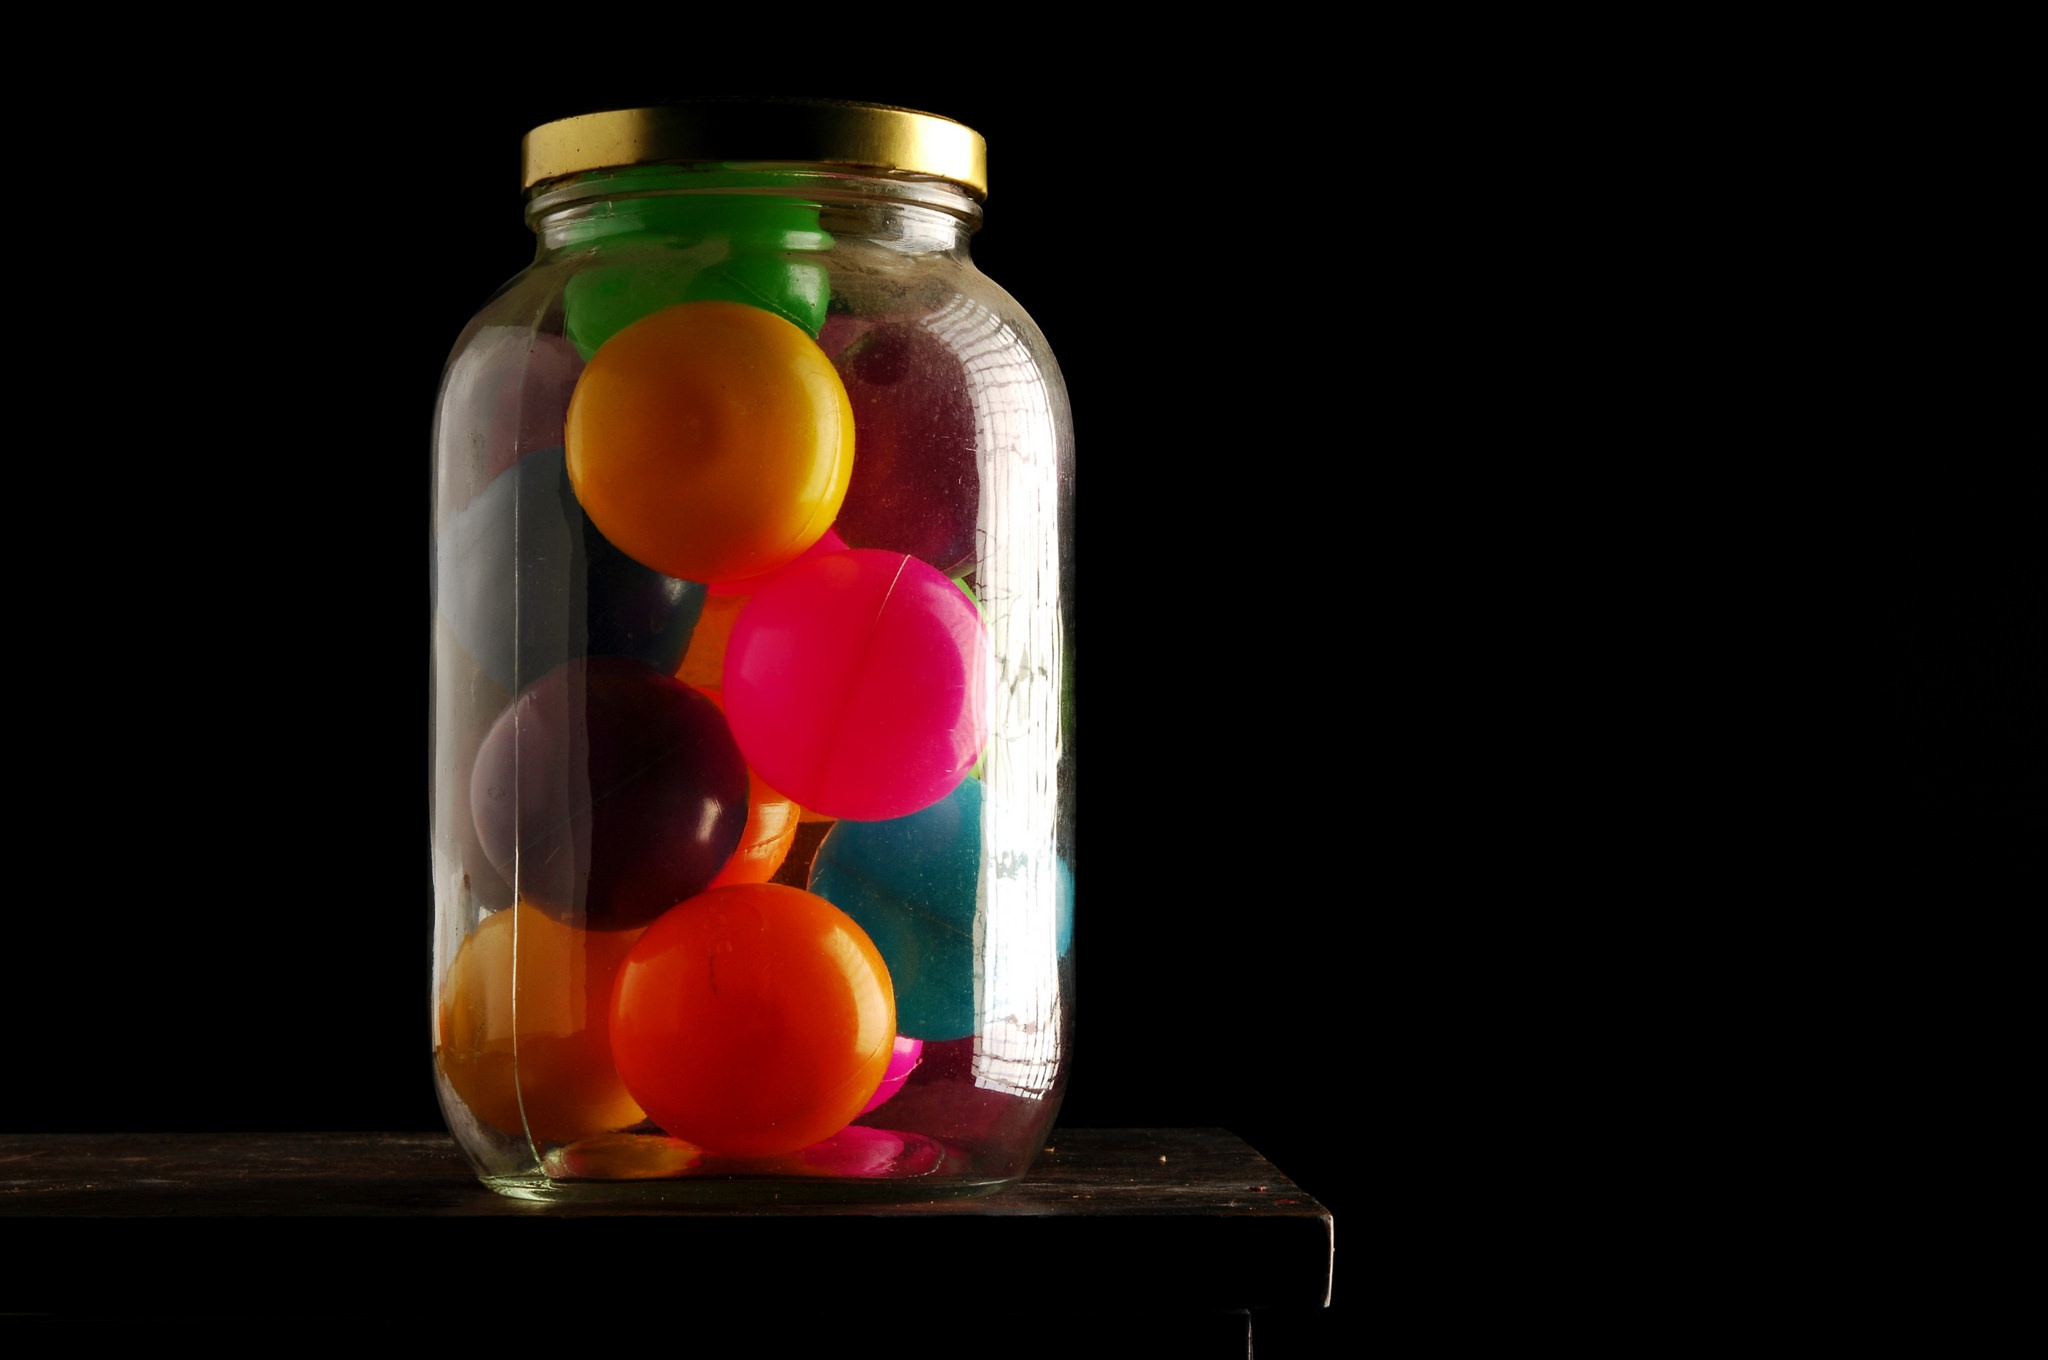 General 2048x1360 jars ball colorful simple background